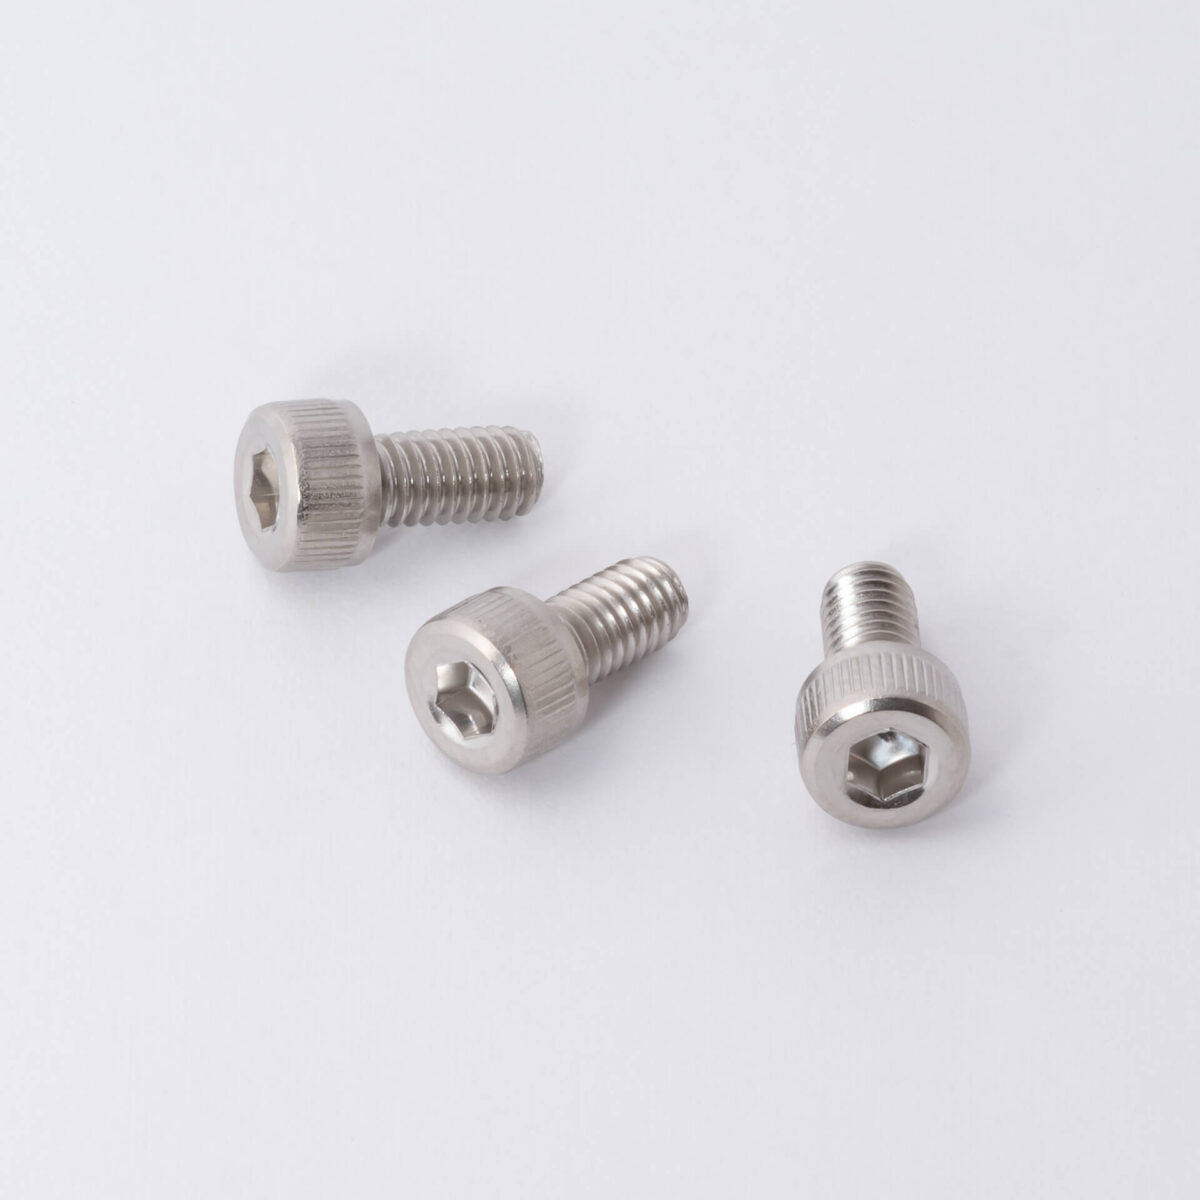 Stainless Nut Clamping Screws (Set of 3)